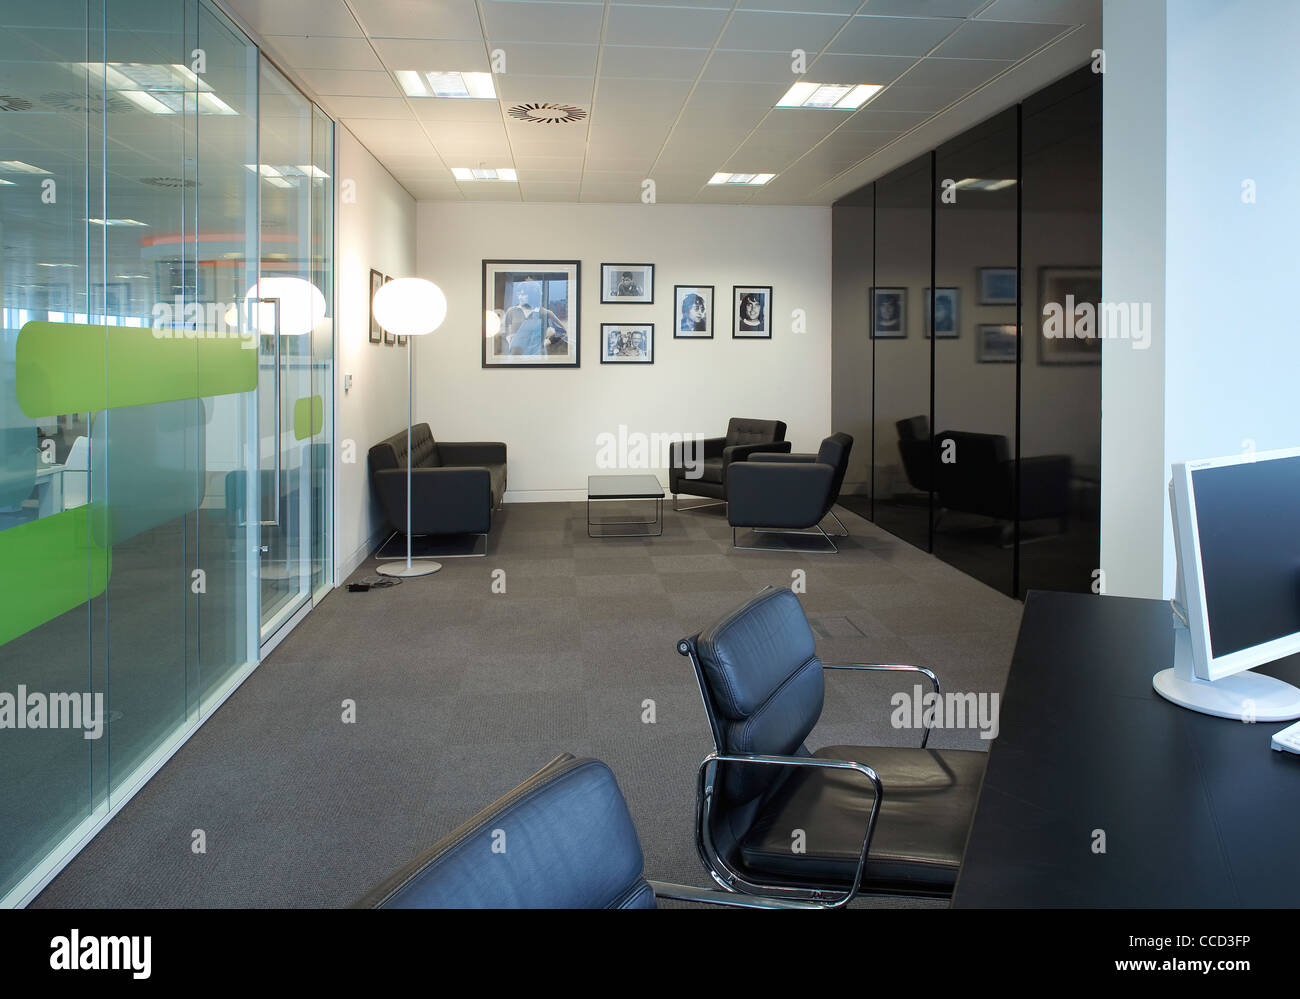 THE PENINSULA, ID:SR/SHEPPARD ROBSON, MANCHESTER, 2010, INTERIOR OF OFFICE WITH CHAIRS Stock Photo